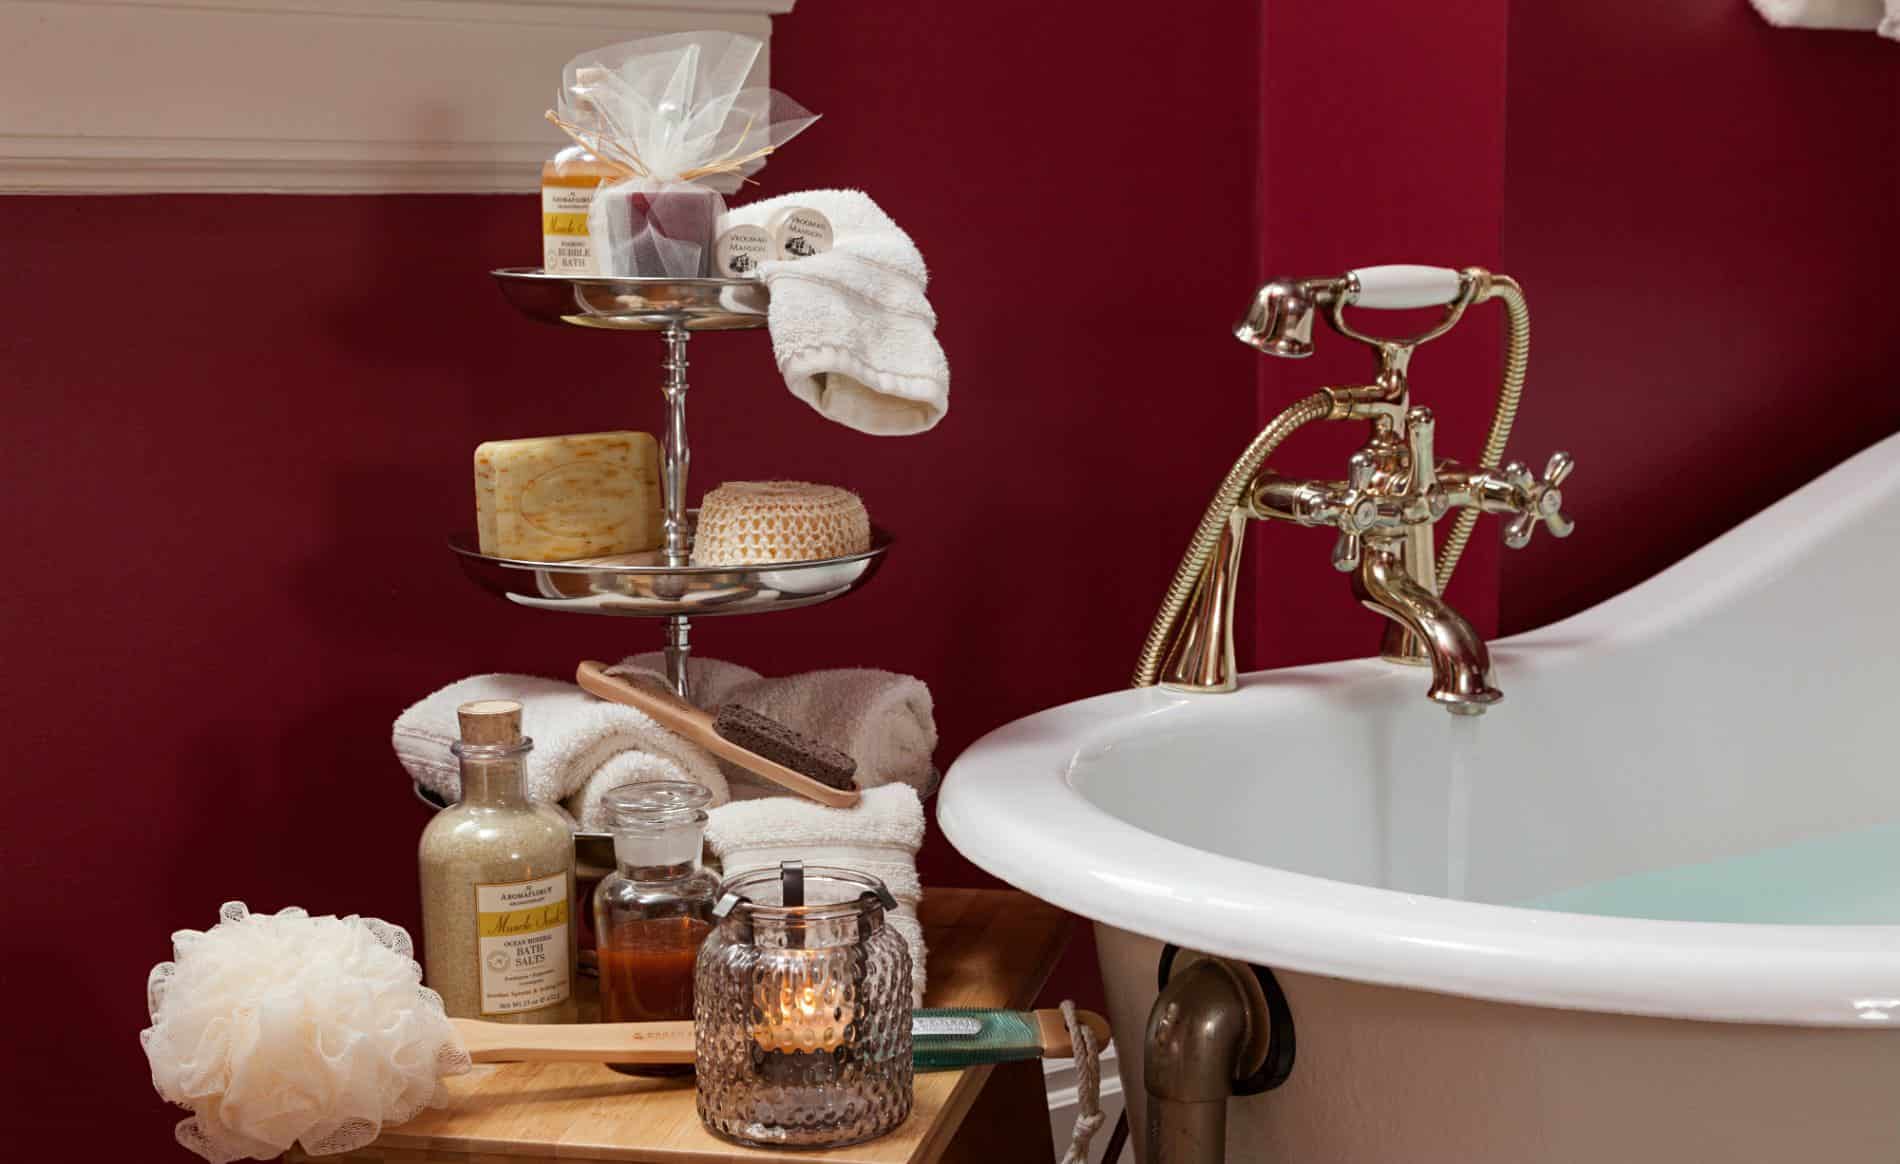 Close-up view of white clawfoot tub in red room and a wood stool topped with white towels and various toiletries